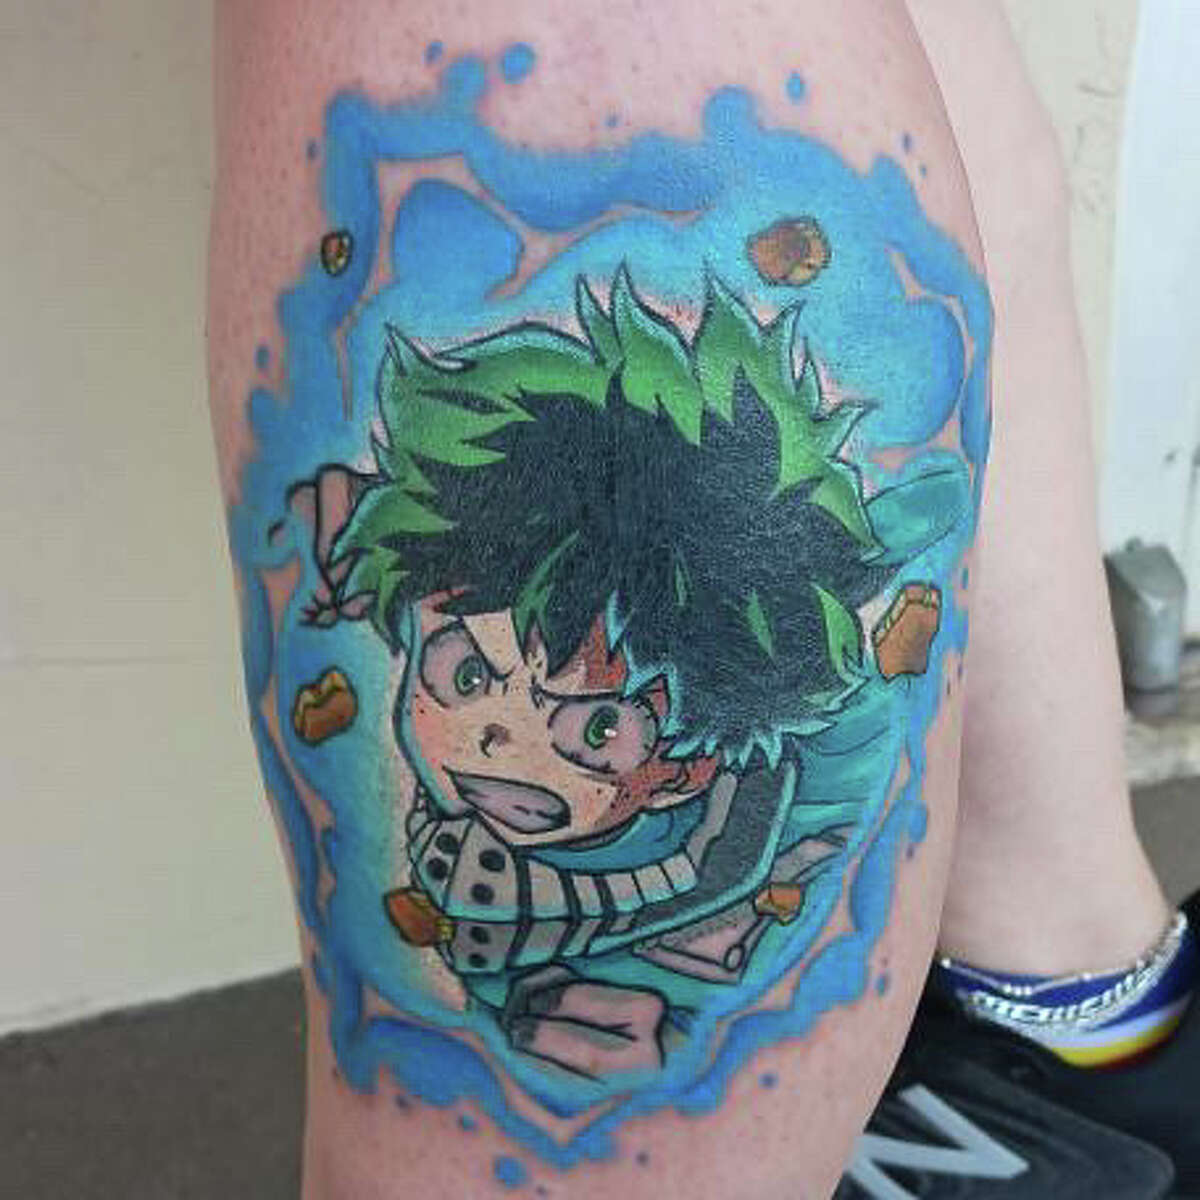 Anime tattoo artist appreciation post Go check out simonkbell on  Instagram hes freaking awesome  rBokuNoHeroAcademia